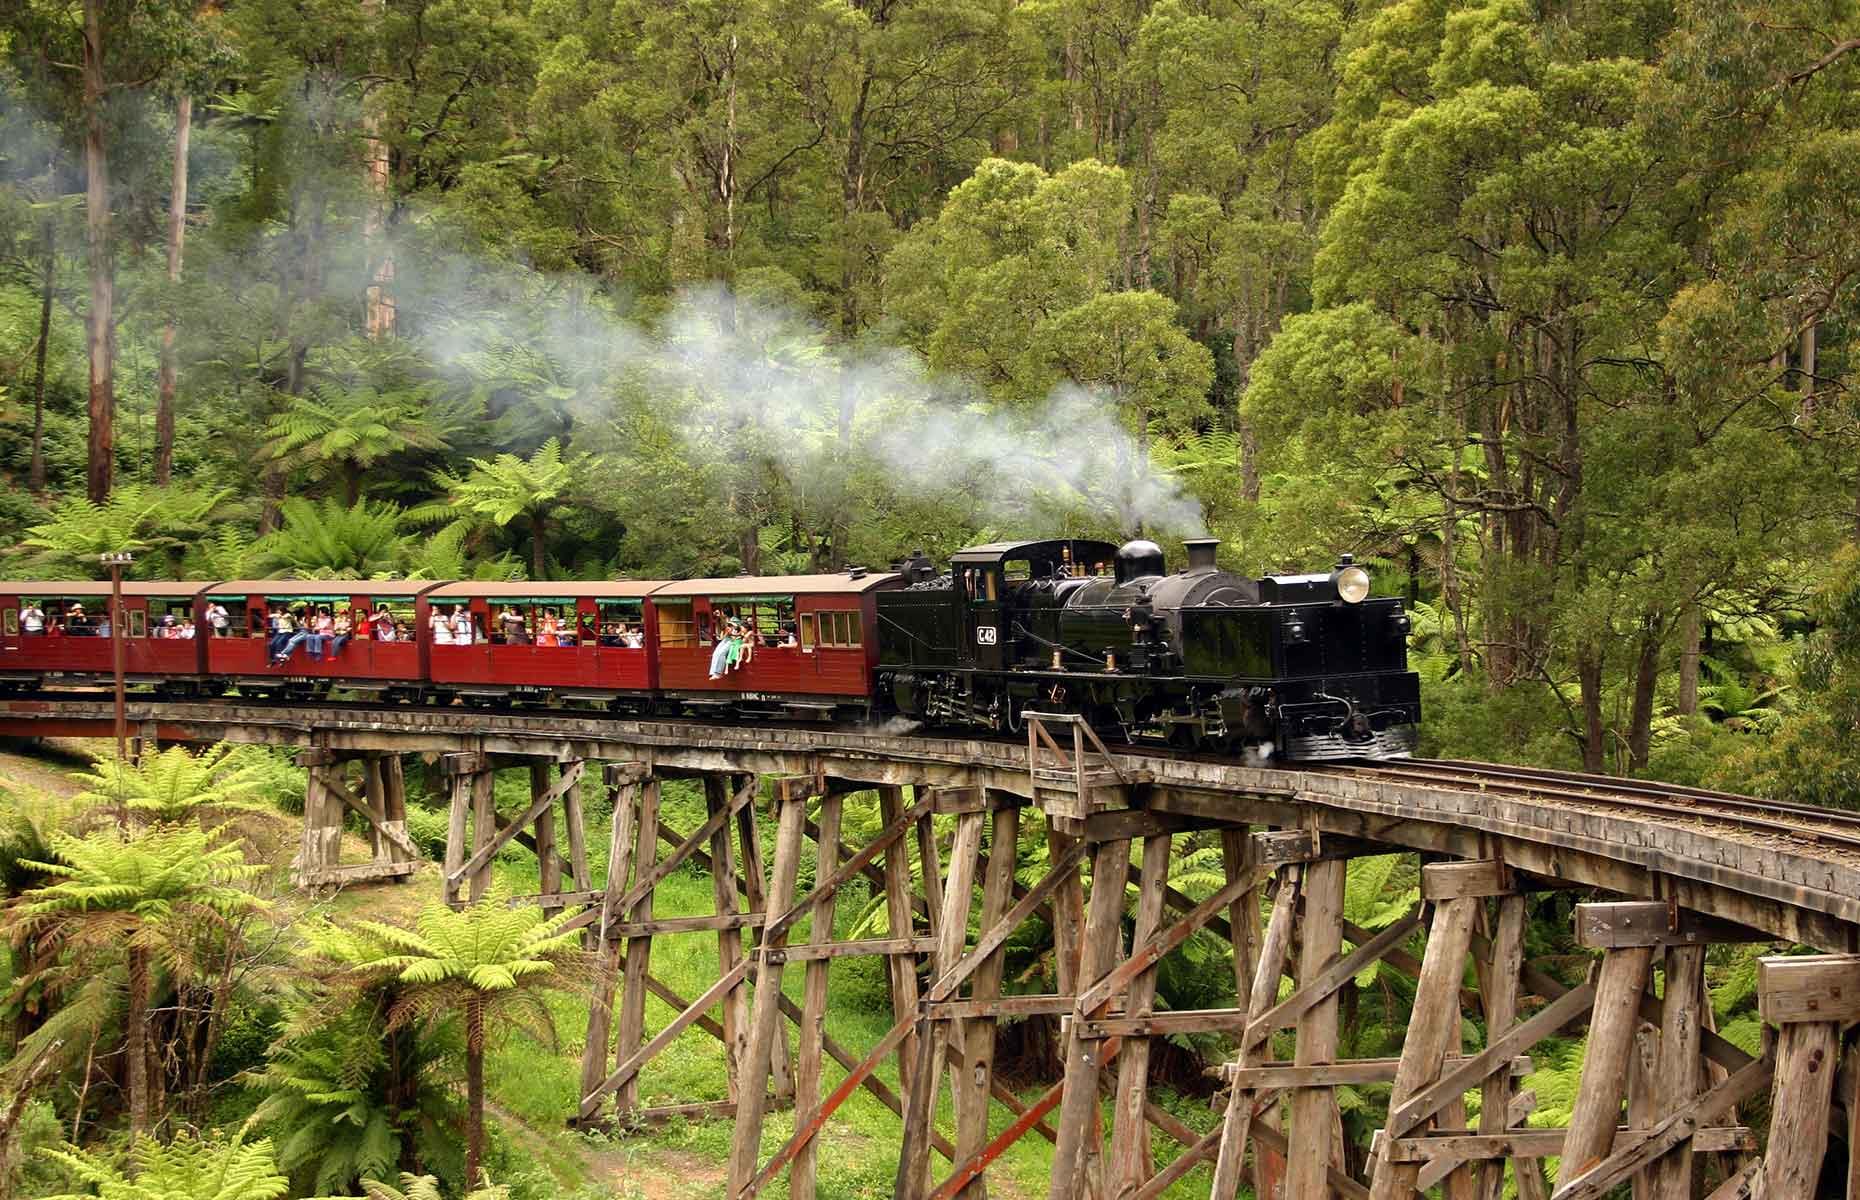 <p>This century-old steam engine looks like it should be chugging through the highlands of Scotland. However, the Puffing Billy Railway travels through temperate rainforest between Belgrave and Lakeside, Menzies Creek and Gembrook. Sit on the carriage sills with your legs dangling over the side and take in towering Mountain Ash trees – then get your camera ready for when you go across the route's iconic Trestle Bridge.</p>  <p><a href="https://www.loveexploring.com/galleries/91216/australias-most-stunning-scenic-train-journeys?page=1"><strong>These are the most scenic train journeys in Australia</strong></a></p>